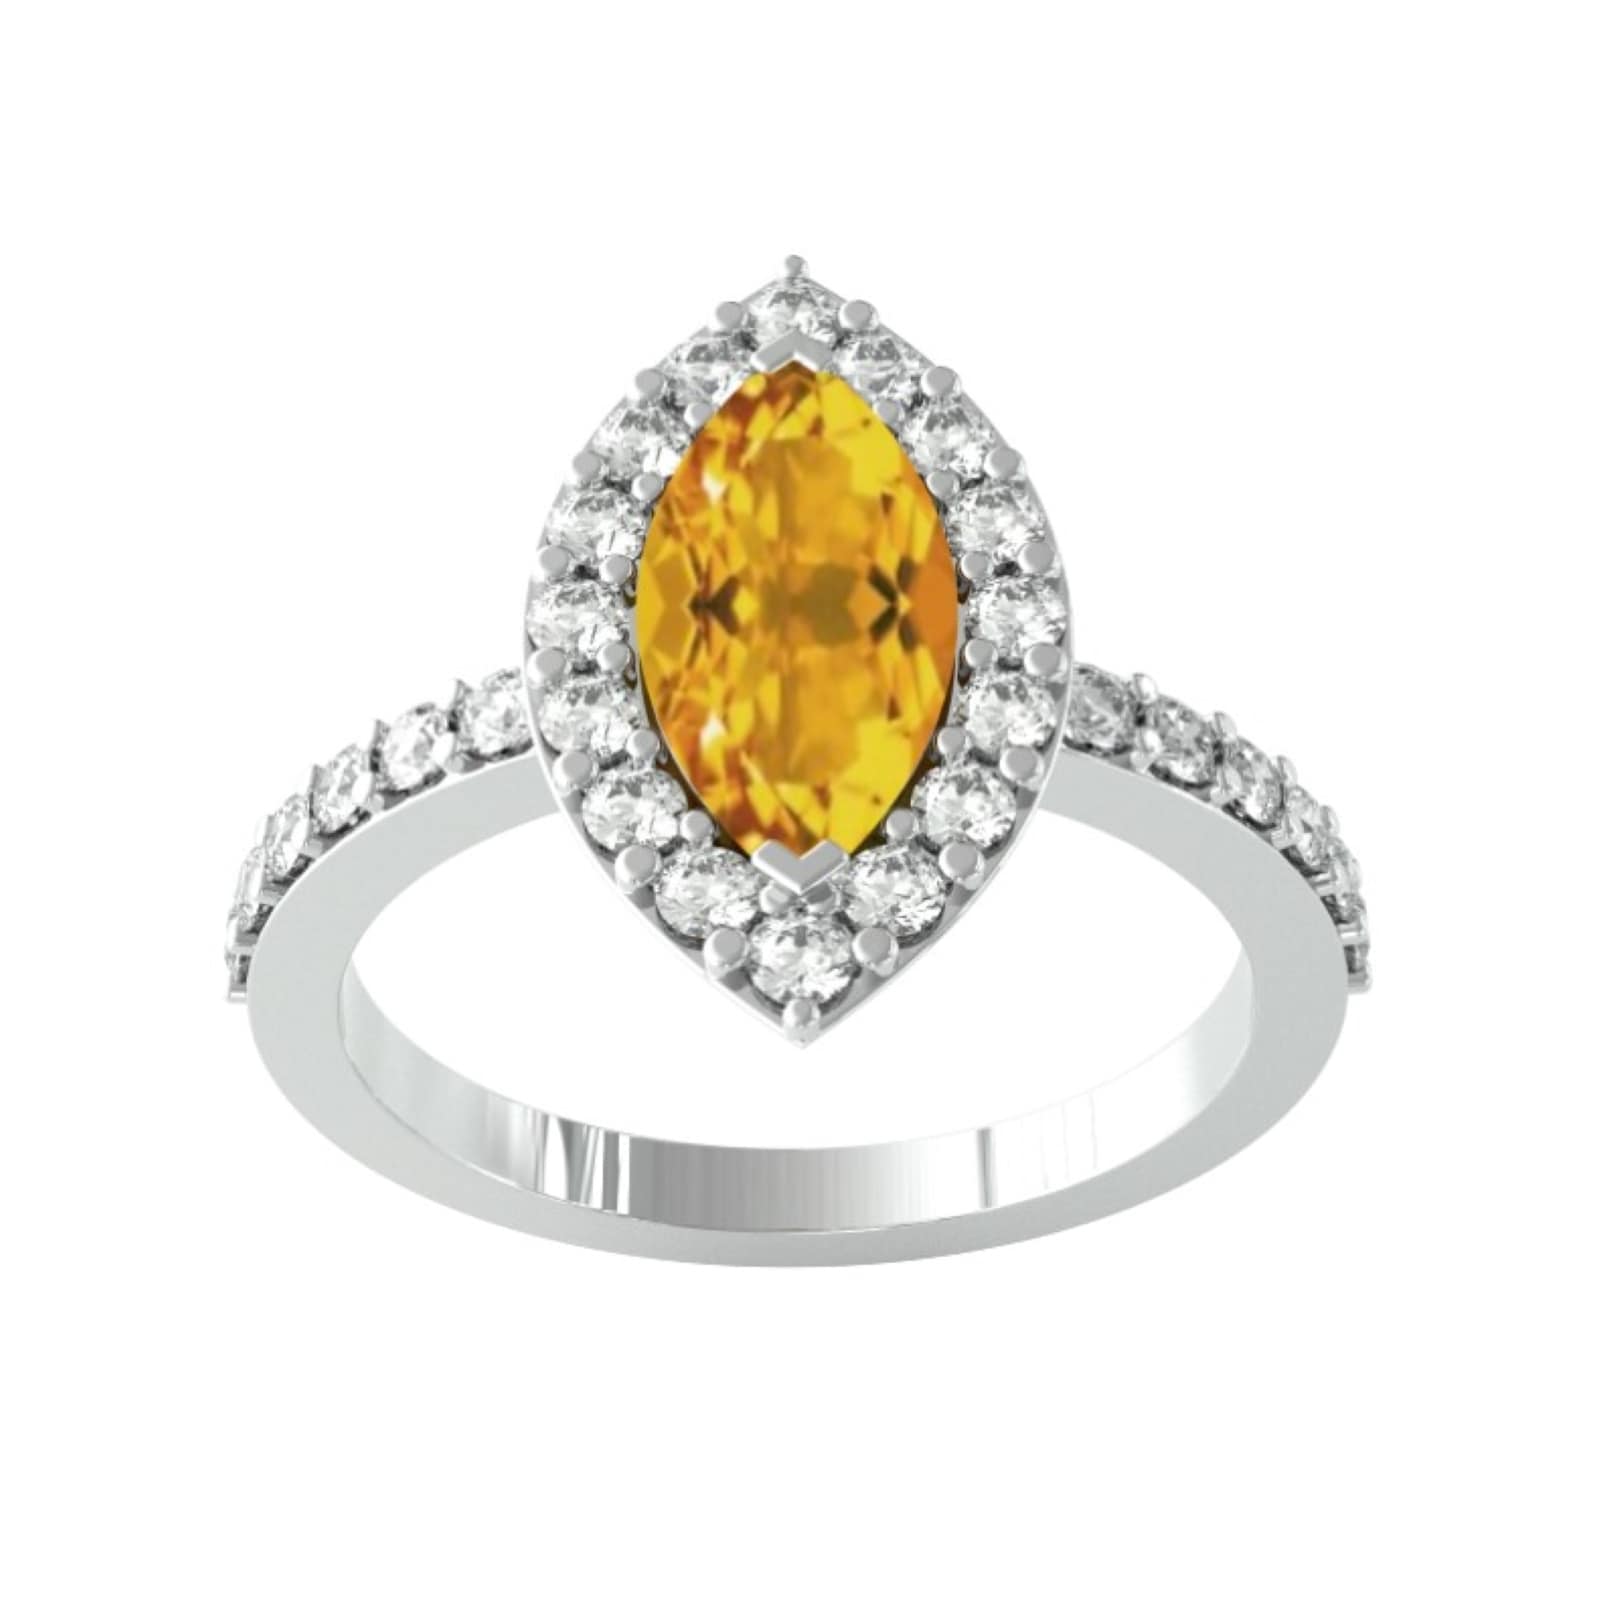 9ct White Gold Marquise Cut Citrine & Diamond Ring - Ring Size G.5